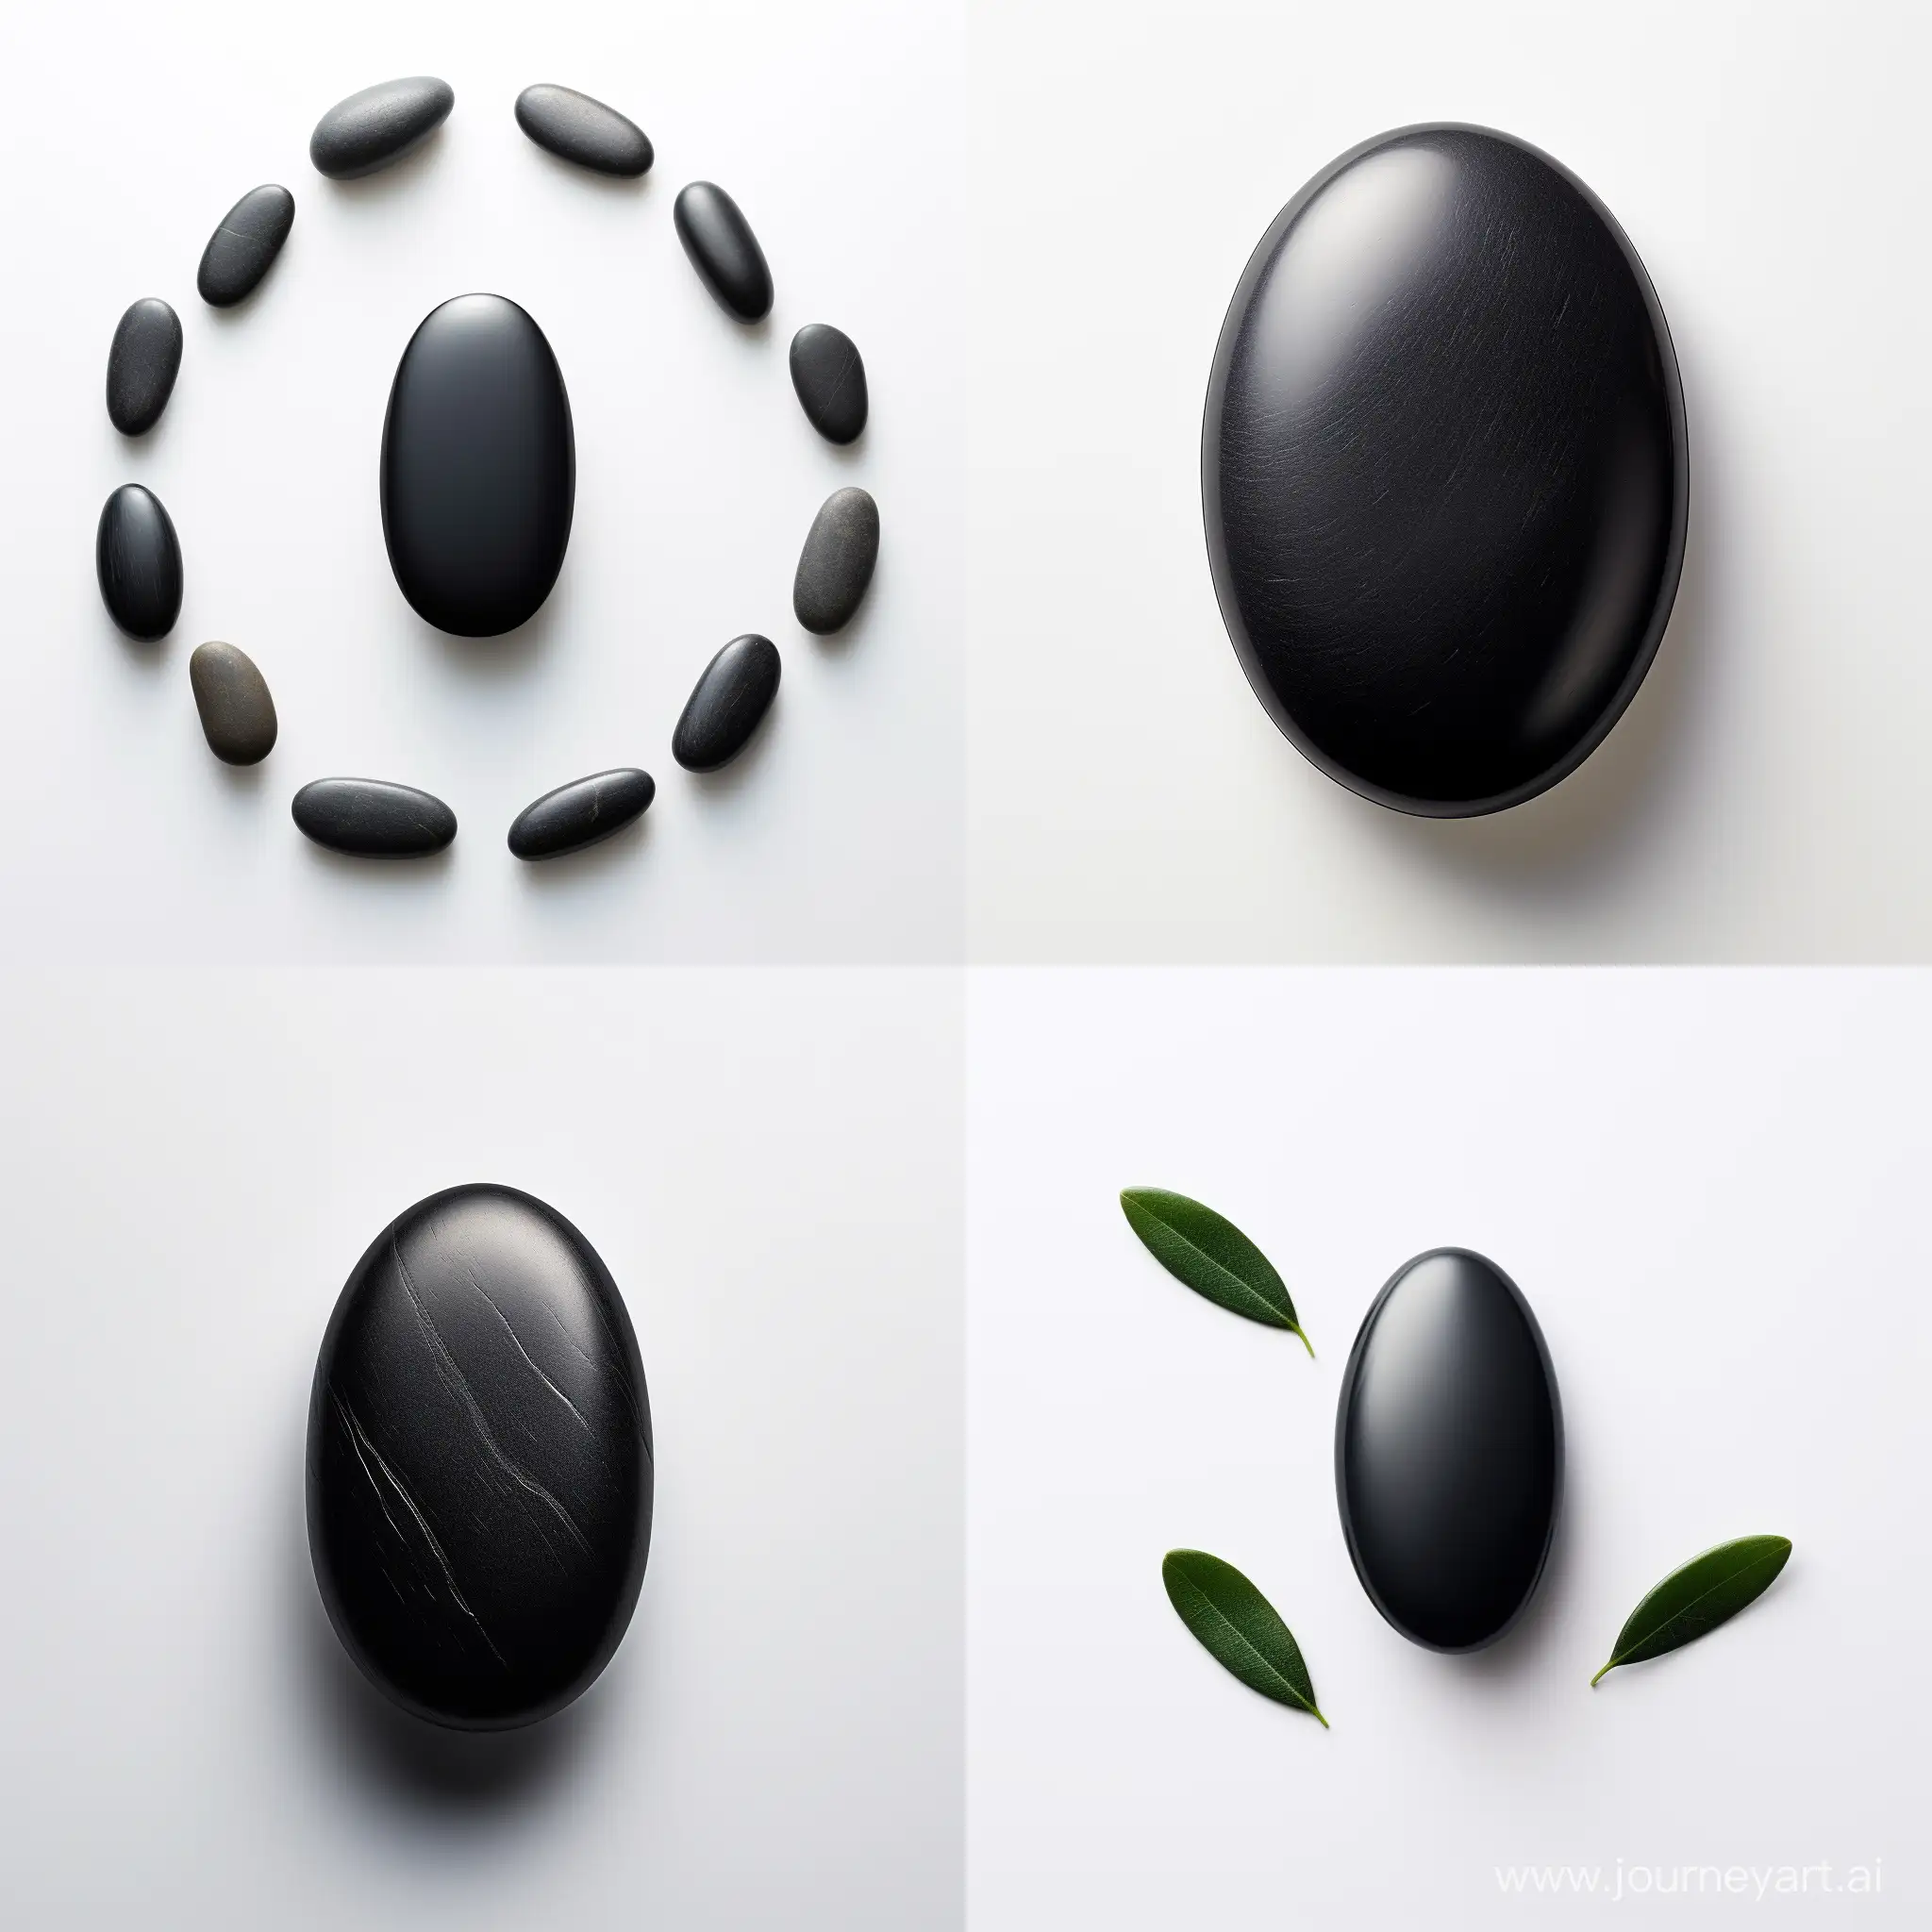 Beautiful stone one piece+oval shape+dark black color+matte texture+plain+slightly elongated horizontally +polished cabochon+medium size+on a white background+view of the stone from above+on a light background
